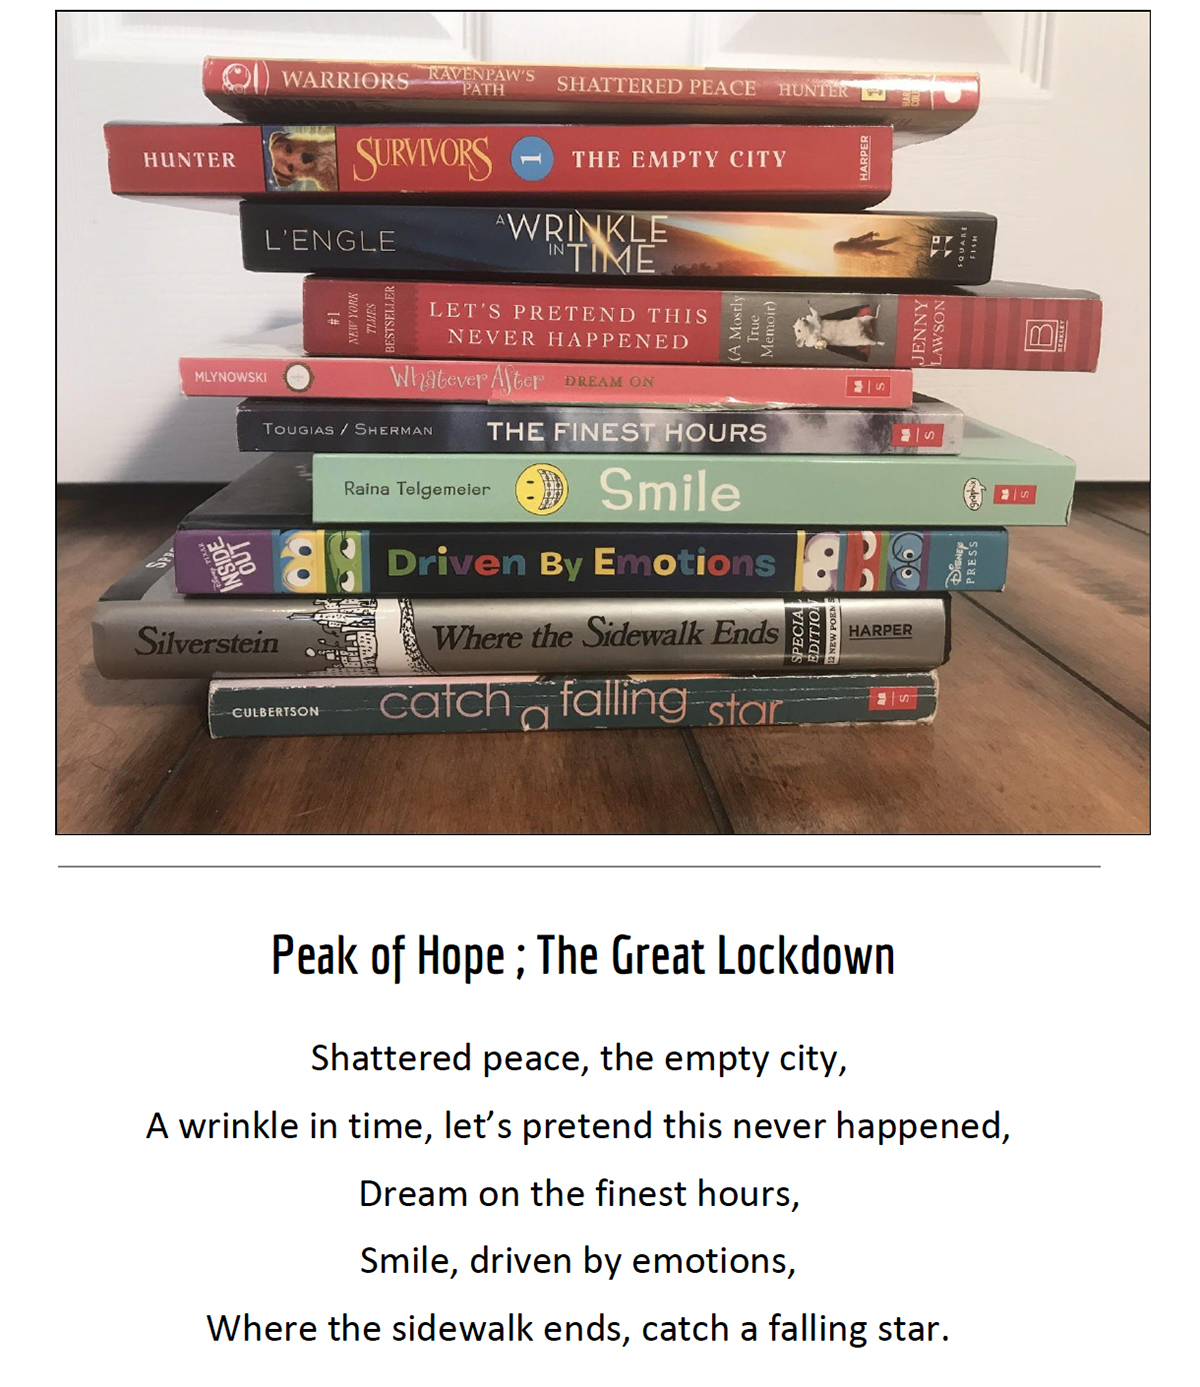 A picture of book spines and a poem.